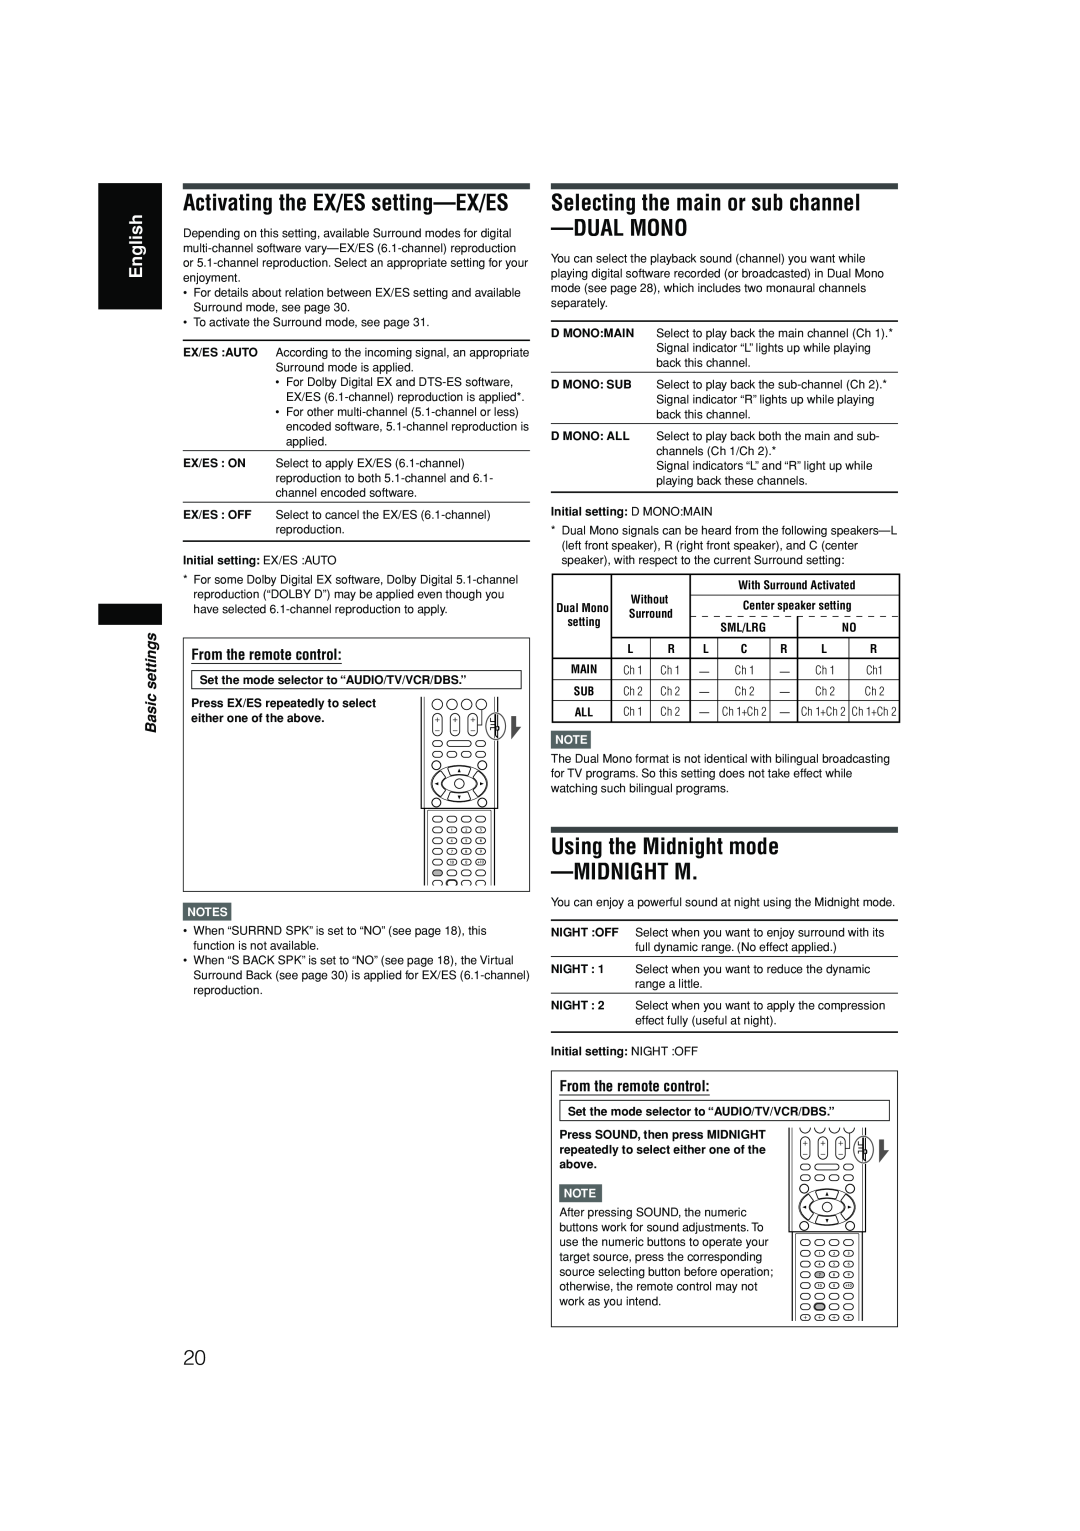 JVC RX-F10S manual Selecting the main or sub channel —DUALMONO, Using the Midnight mode —MIDNIGHTM, English, Basic settings 